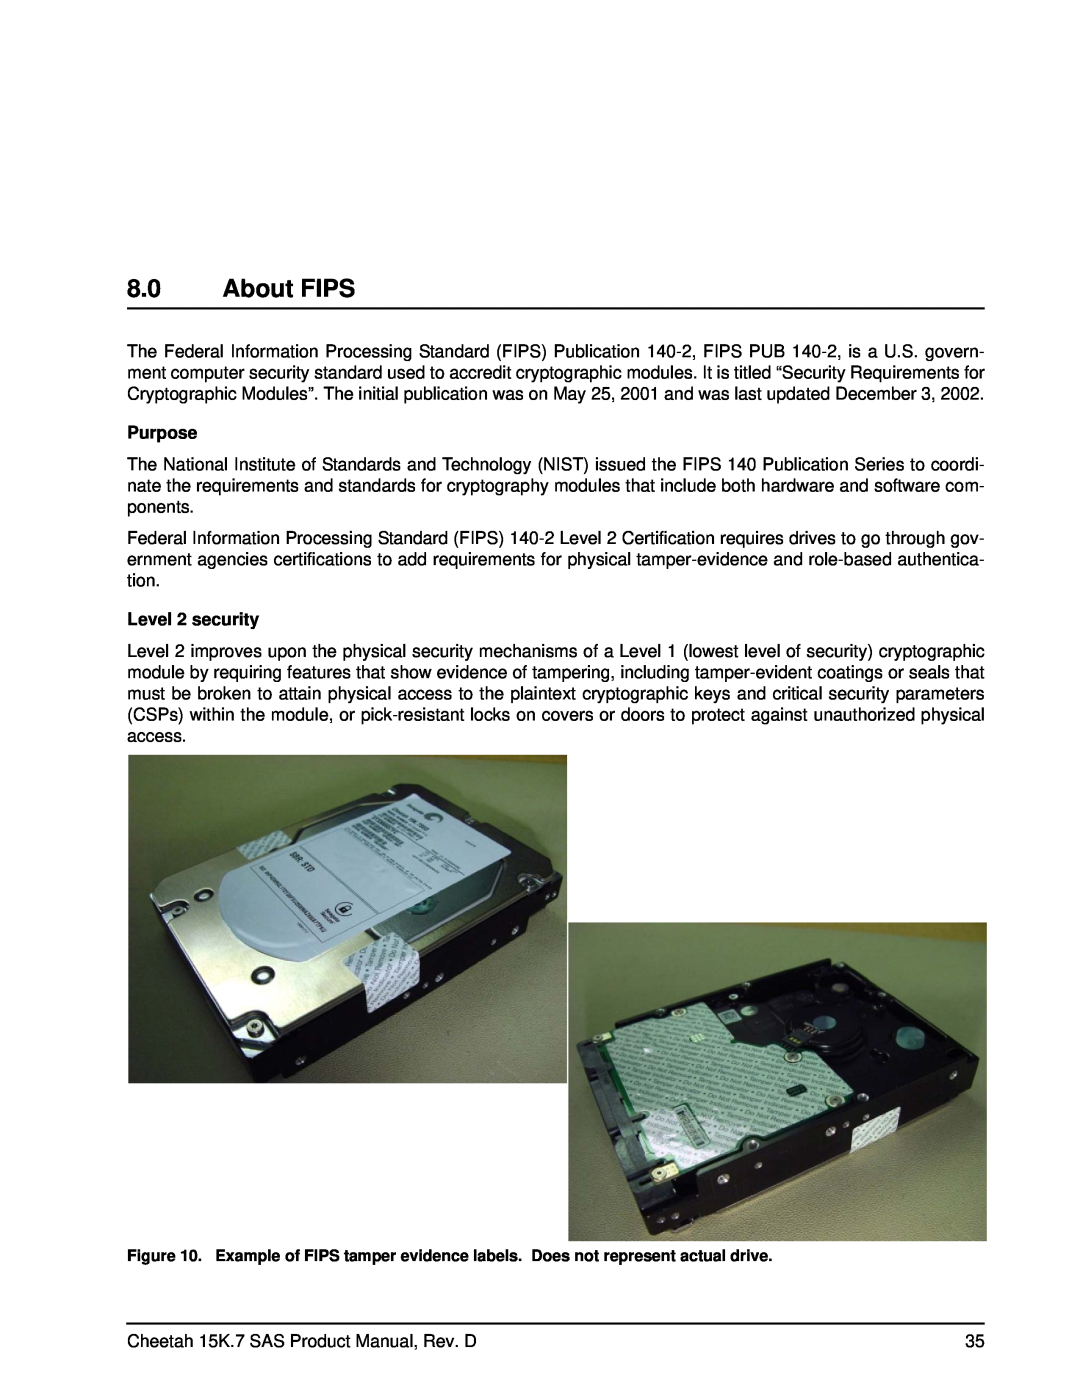 Seagate ST3600857SS, ST3300457SS, ST3450657SS manual About FIPS, Purpose, Level 2 security 